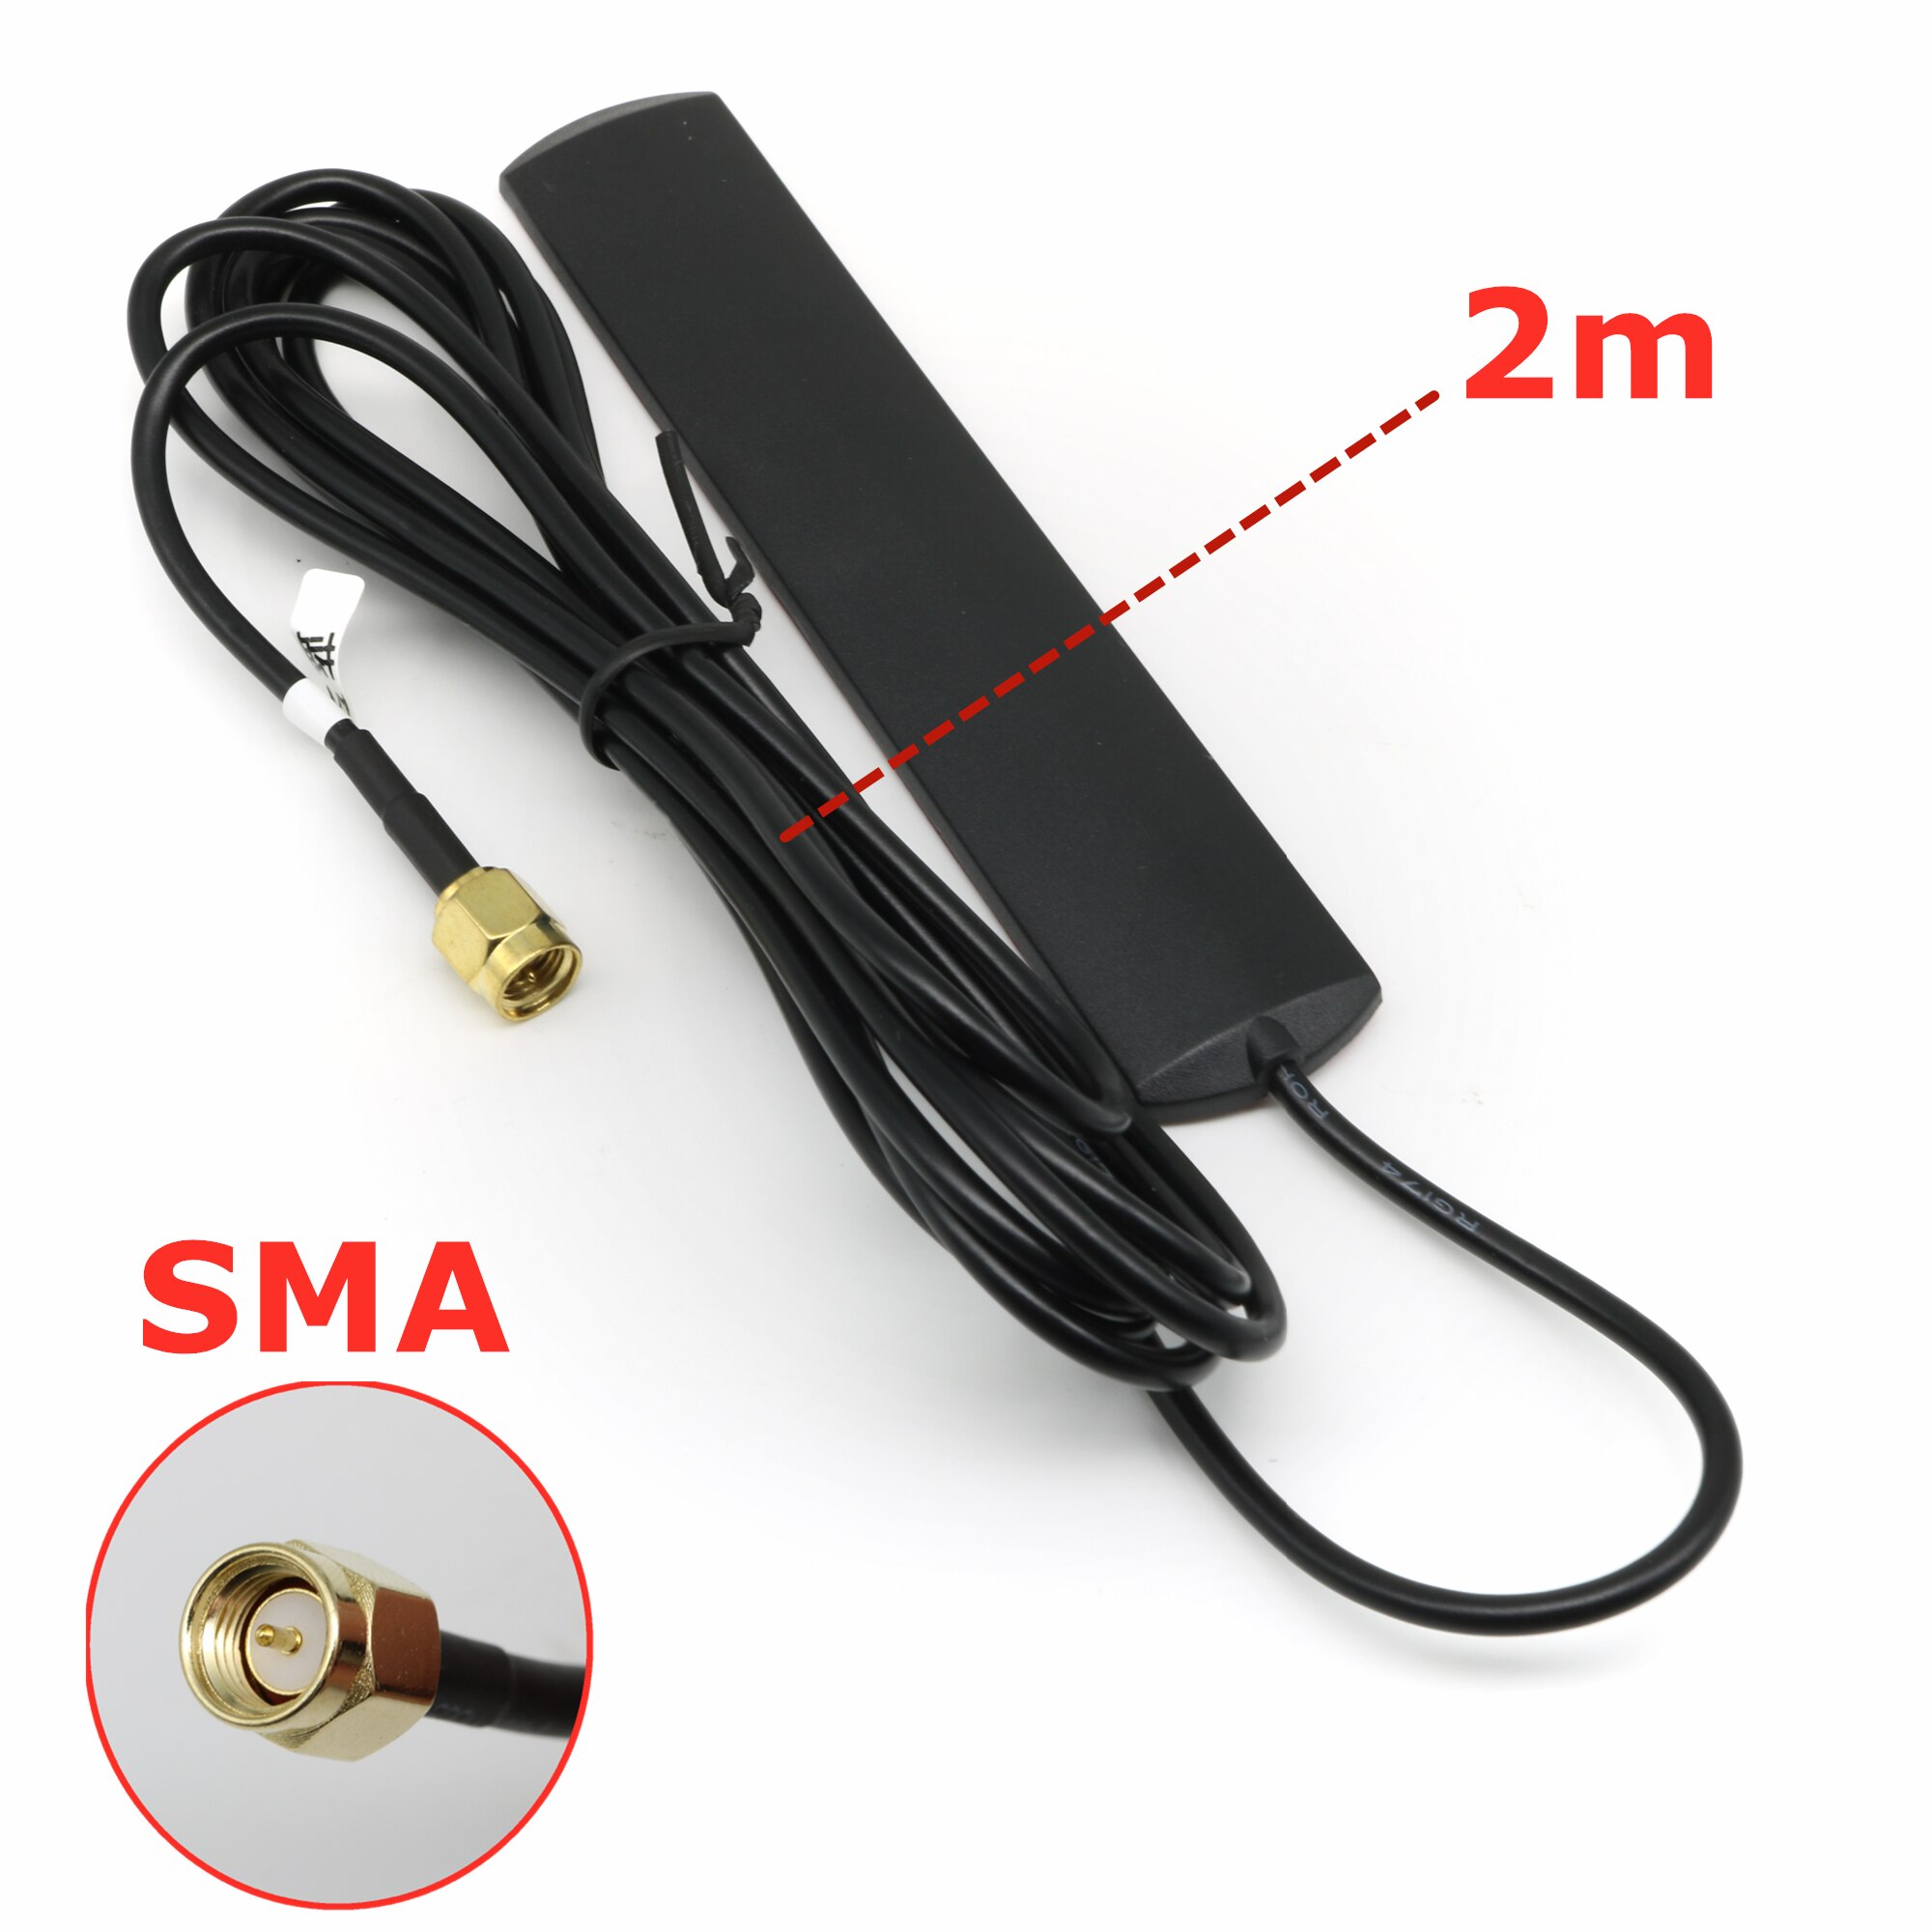 2dbi/3dbi Gsm-antenne Met Sma Male Connector Gsm Antenne RG174 Met 2M Lengte Kabel Voor Gsm 2.4G Wifi Patch Antenne Auto Antenne